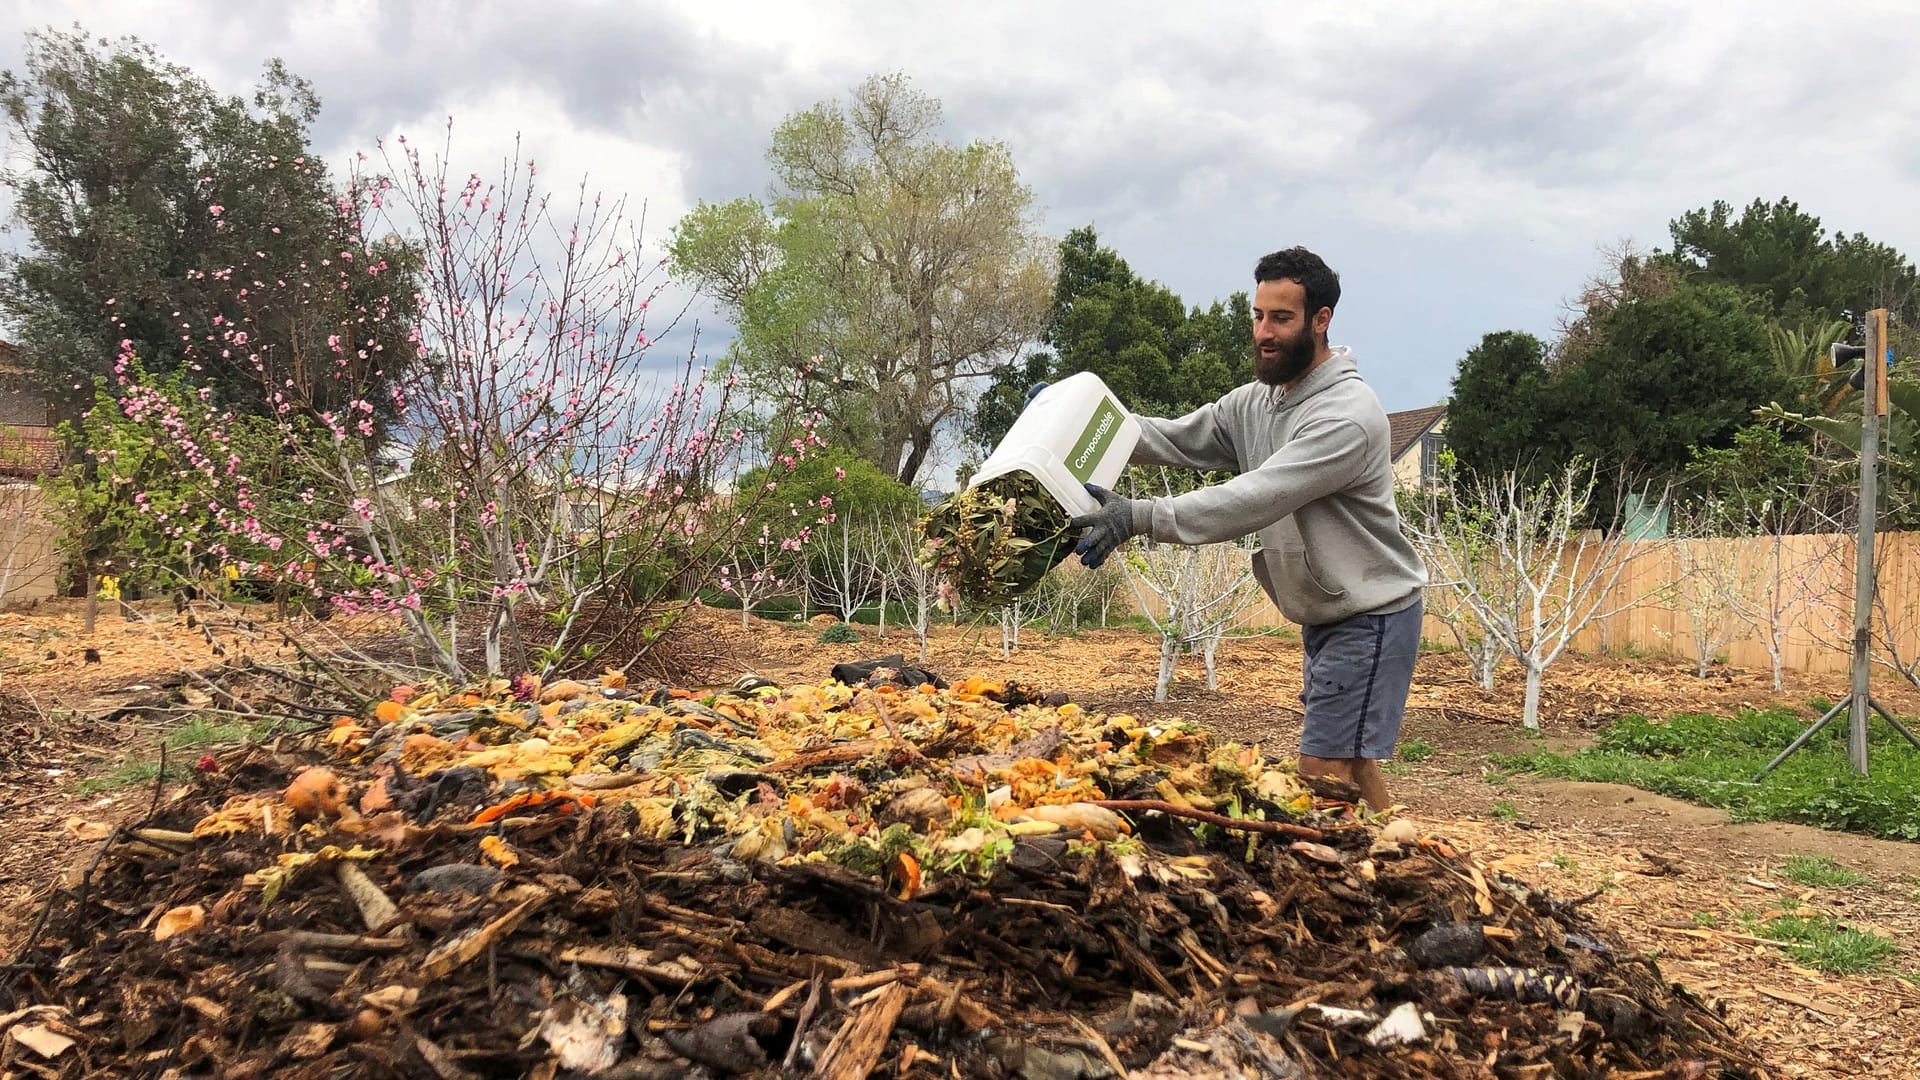 Image: Person throwing food waste onto a compost pile